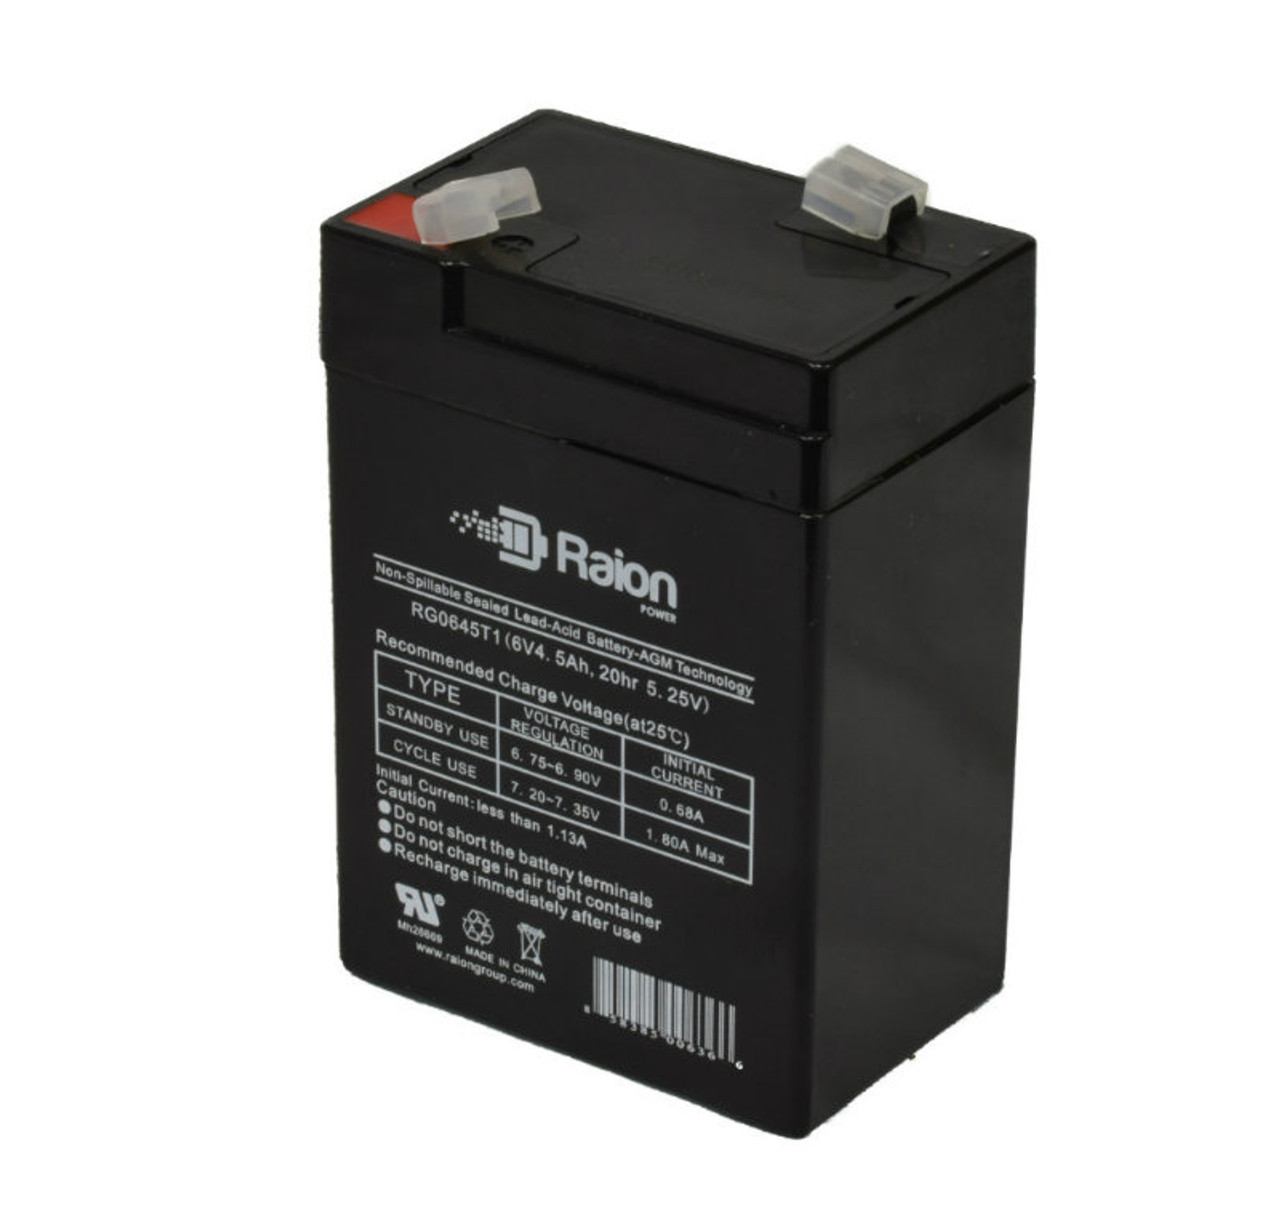 Raion Power RG0645T1 6V 4.5Ah Replacement Battery Cartridge for Criticare Systems Pulse Oximeter 50245